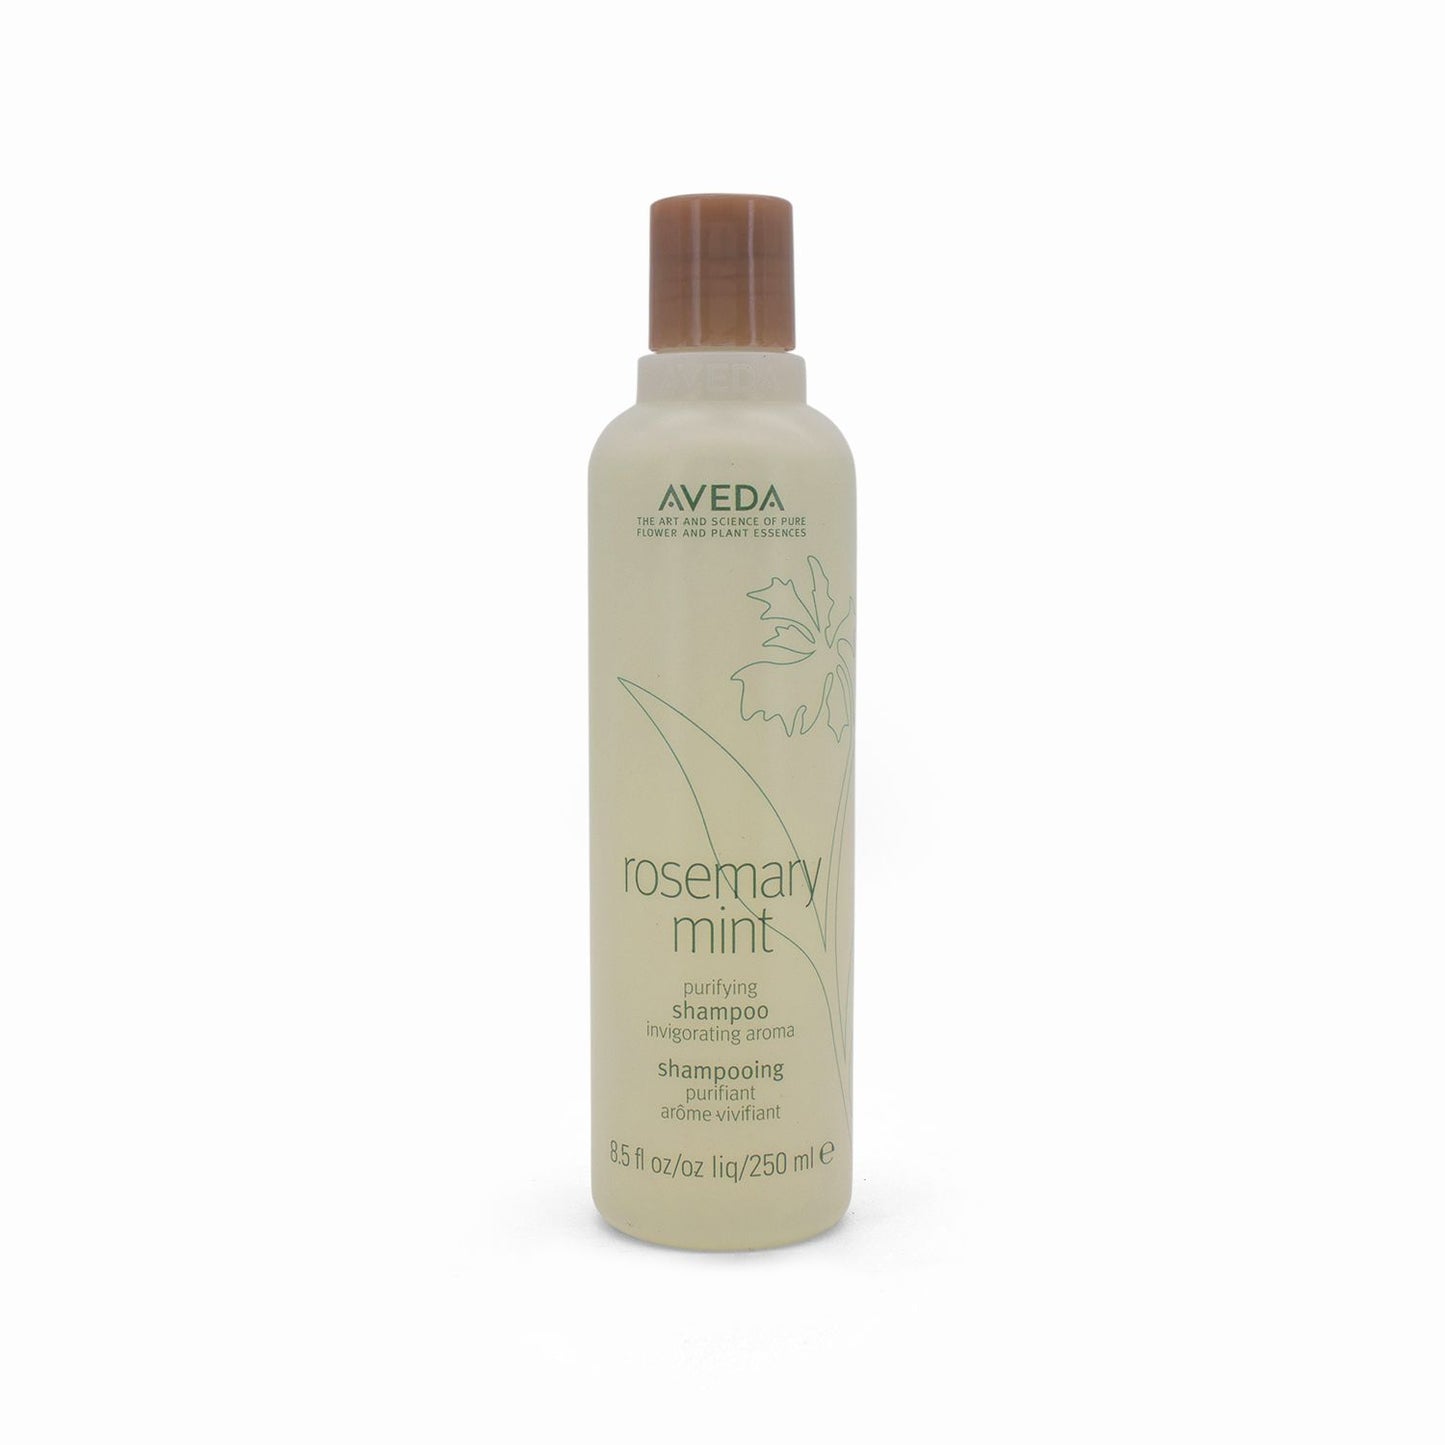 Aveda Rosemary Mint Purifying Shampoo 250ml - Imperfect Container